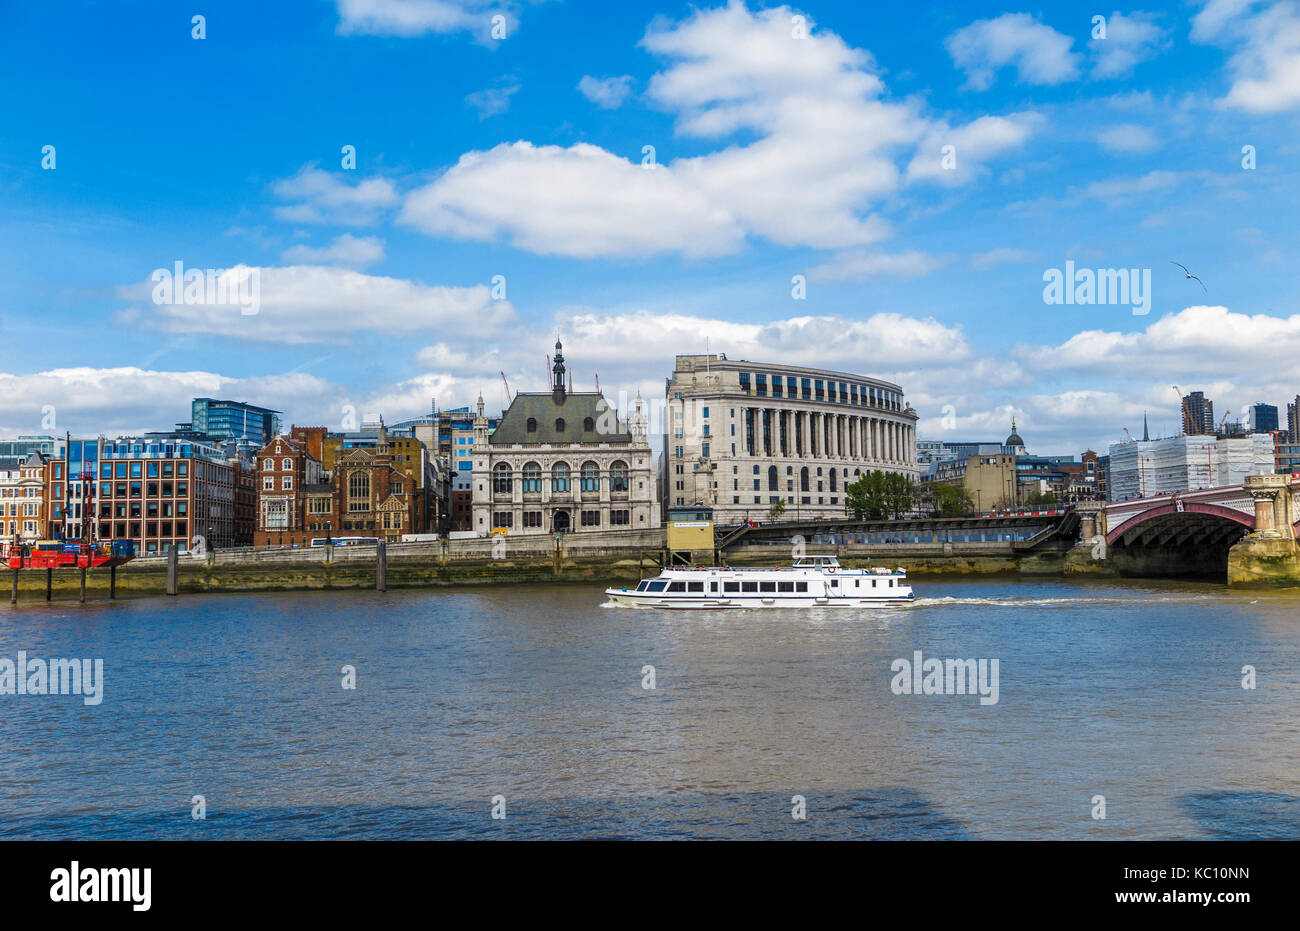 White river cruise tourist sightseeing boat sails along the River Thames by Unilever House and 60 Victoria Embankment, London EC4 on a sunny day Stock Photo